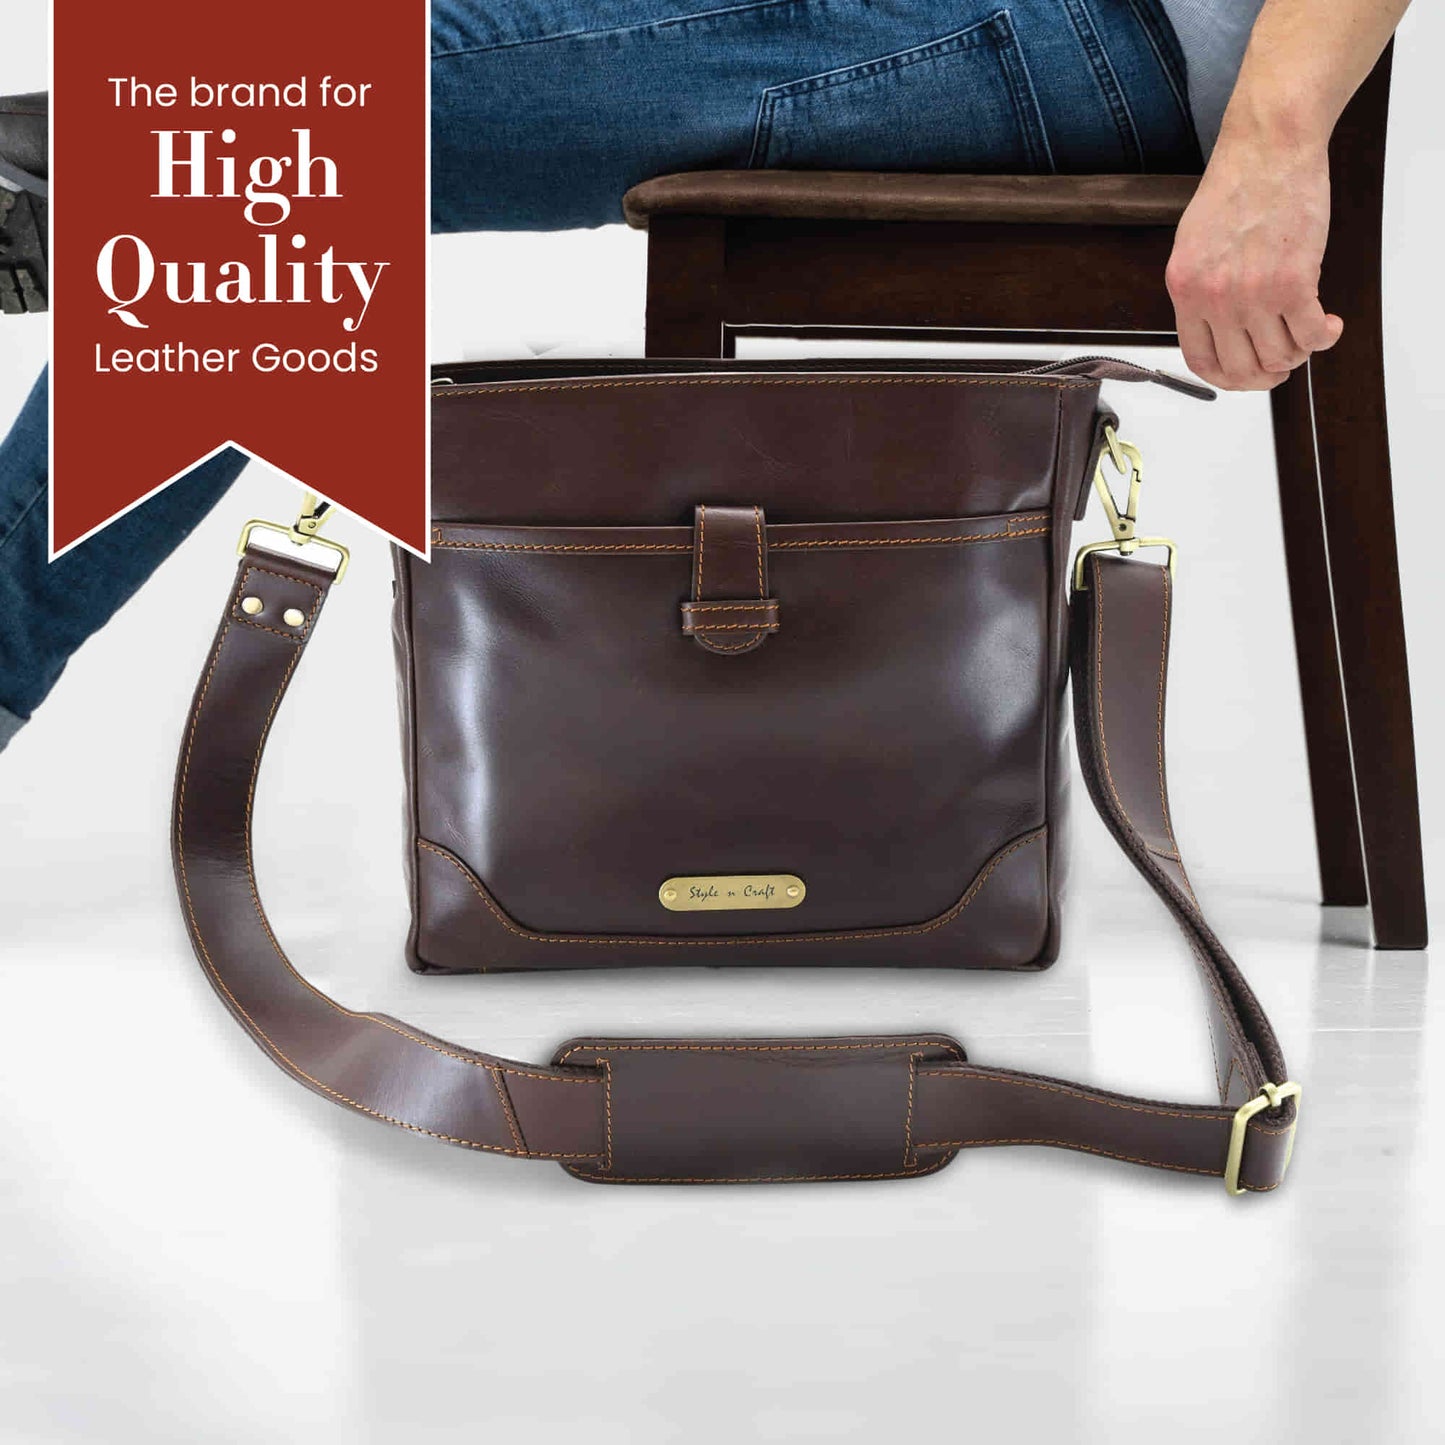 Style n Craft 392001 Cross-body Messenger Bag in Full Grain Dark Brown Leather - Front View of the Bag in Use - Lifestyle Picture